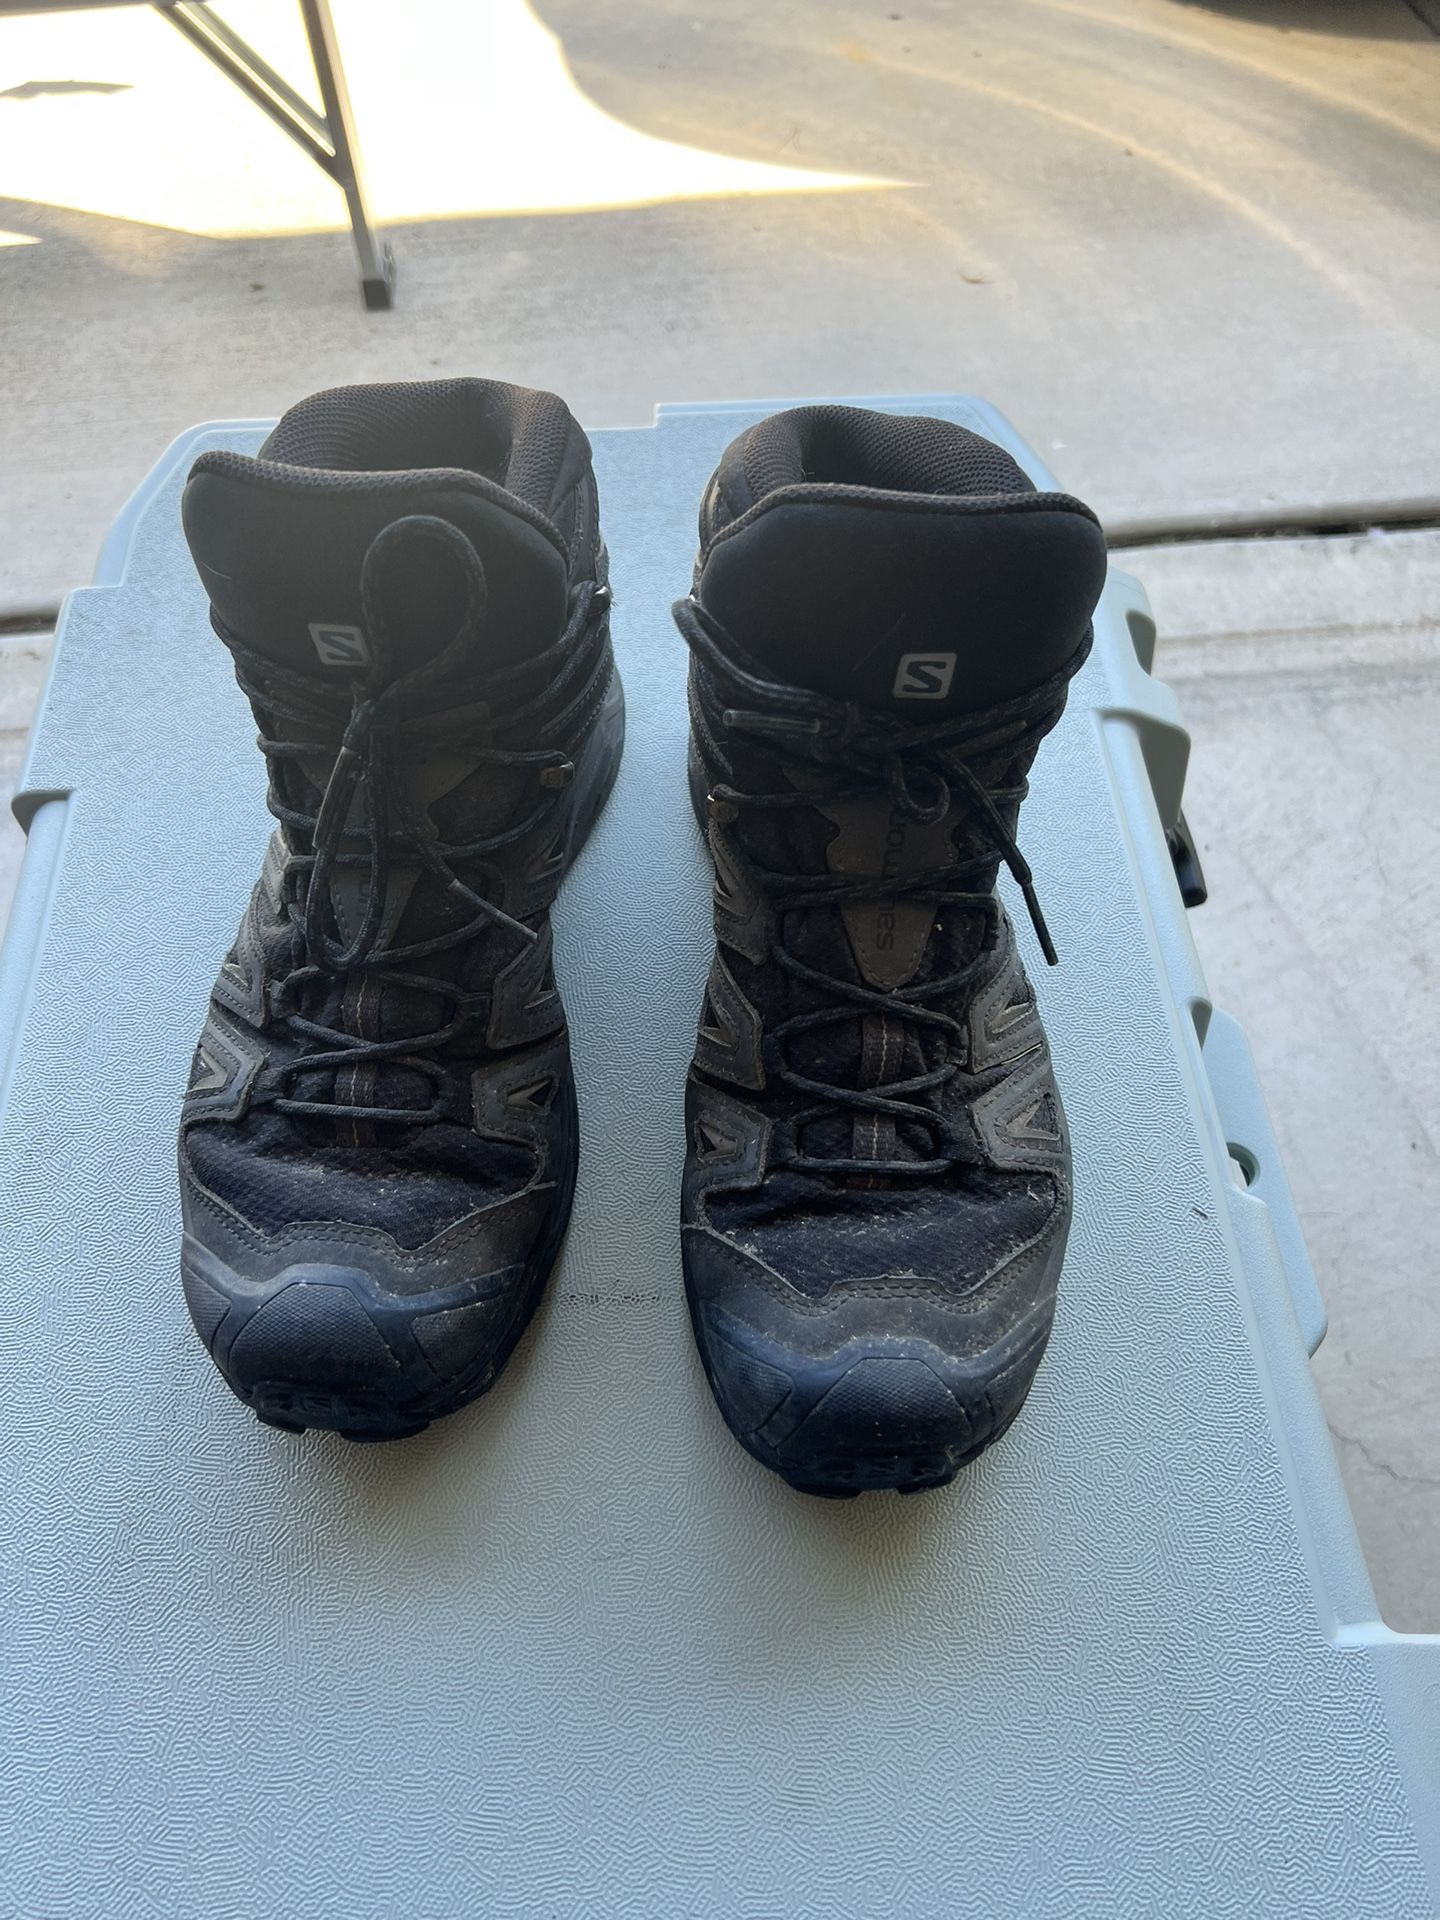 quest gtx for in Carlsbad, CA - OfferUp